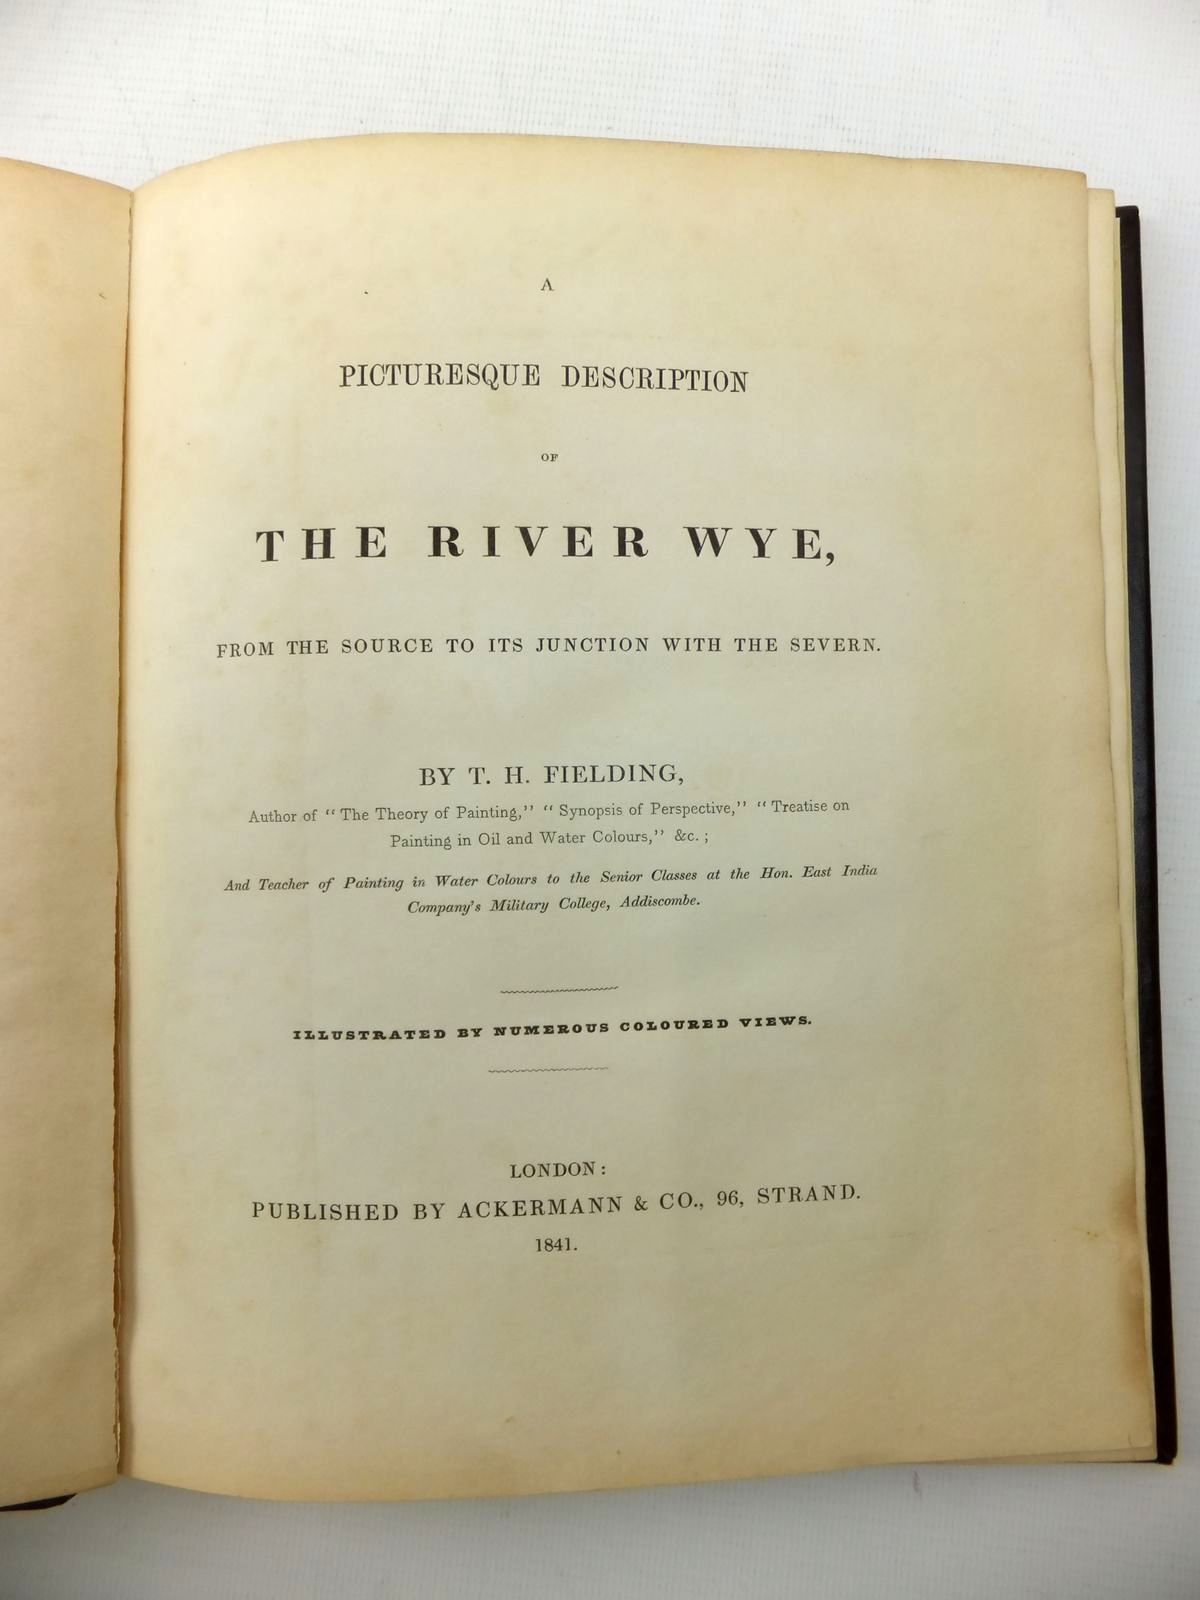 Photo of A PICTURESQUE DESCRIPTION OF THE RIVER WYE FROM THE SOURCE TO ITS JUNCTION WITH THE SEVERN written by Fielding, T.H. published by Ackermann & Co. (STOCK CODE: 570371)  for sale by Stella & Rose's Books